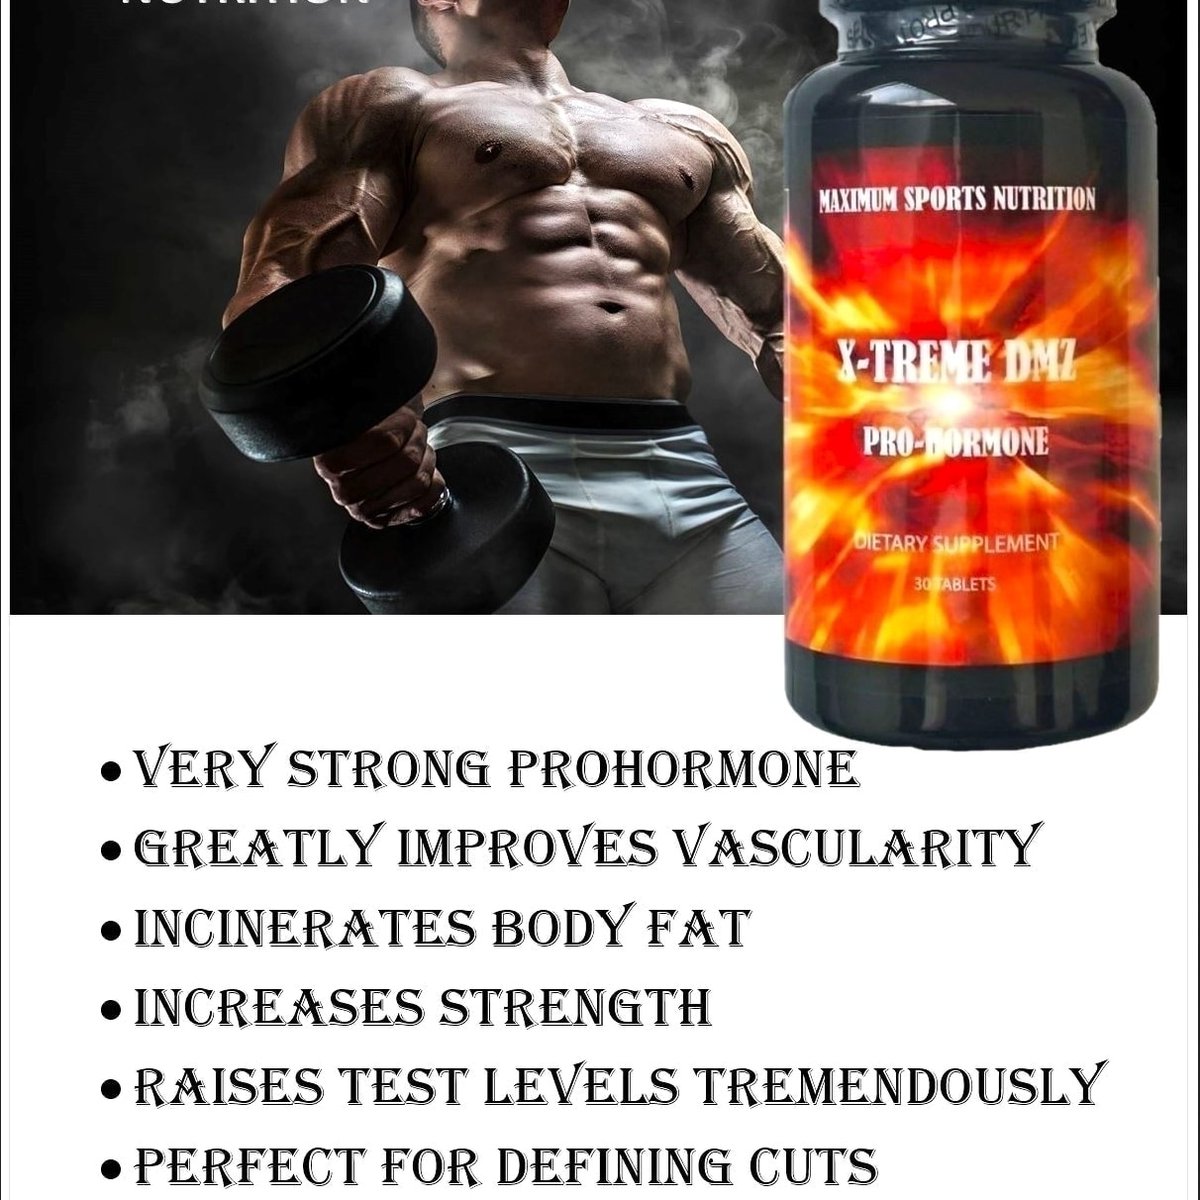 Maximum Sports Nutrition XTREME DMZ is 20% off using Promo Code MAX20 at checkout. Visit musclemindsportsnutrition.com and get yours today. #preworkout #supplements #fatburner #weightloss #workout #prohormones #sarms #steroids #fitness #exercise #gym #PCT #vitamins #testosterone